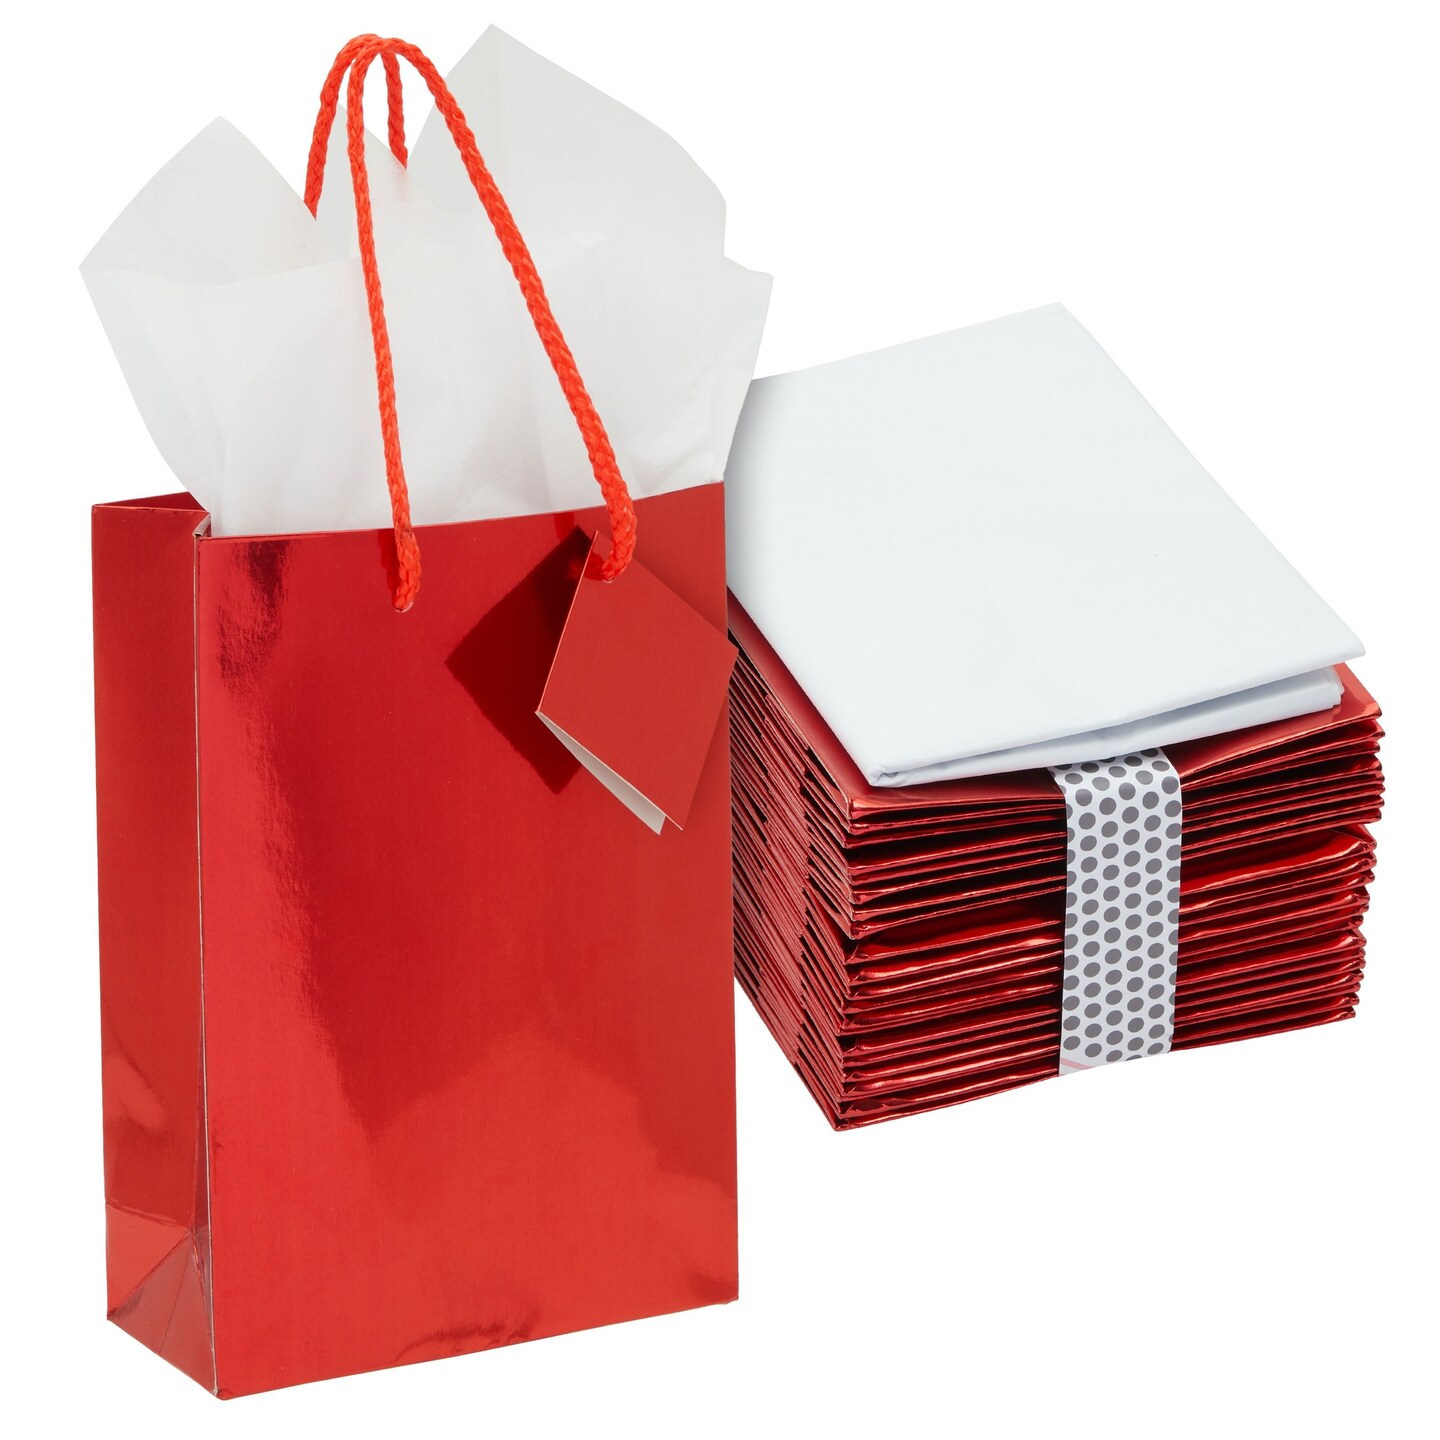 20-Pack Small Metallic Gift Bags with Handles, 5.5x2.5x7.9-Inch Paper Bags  with Foil Coating, White Tissue Paper Sheets, and Tags for Small Business  (Red)